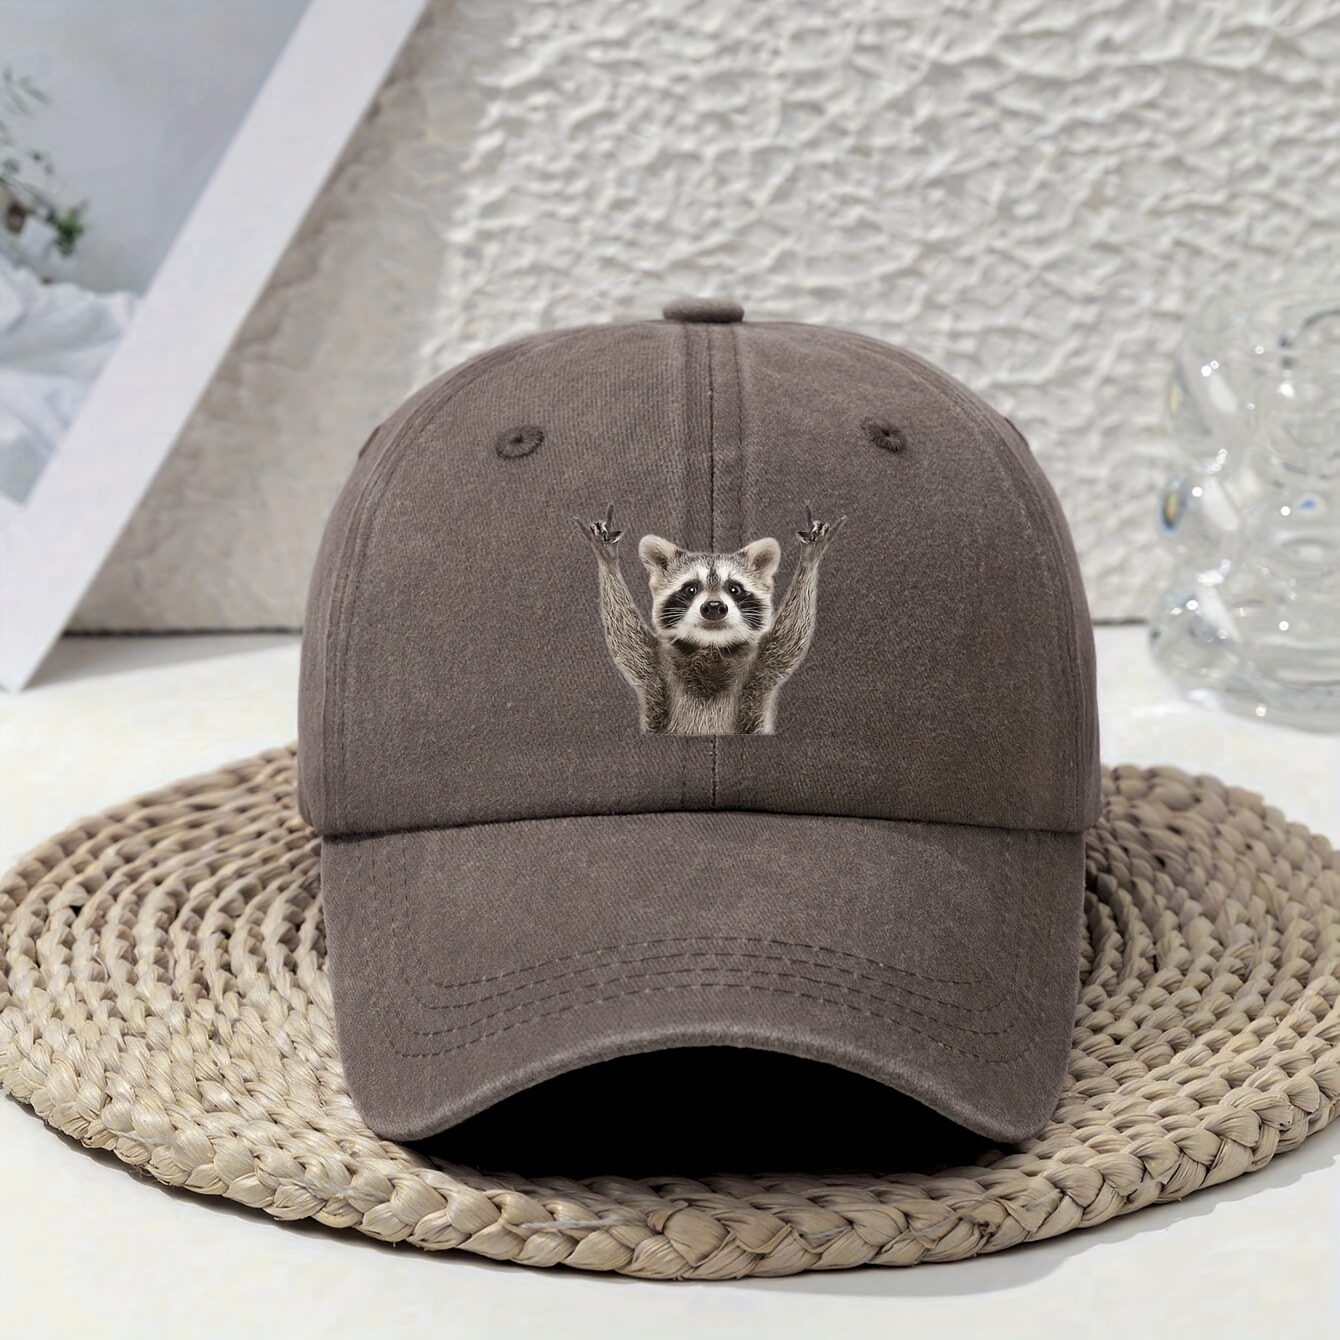 

Raccoon Printed Baseball Cap Stylish Washed Dad Hat Outdoor Adjustable Sun Protection Sports Hats For Women Men